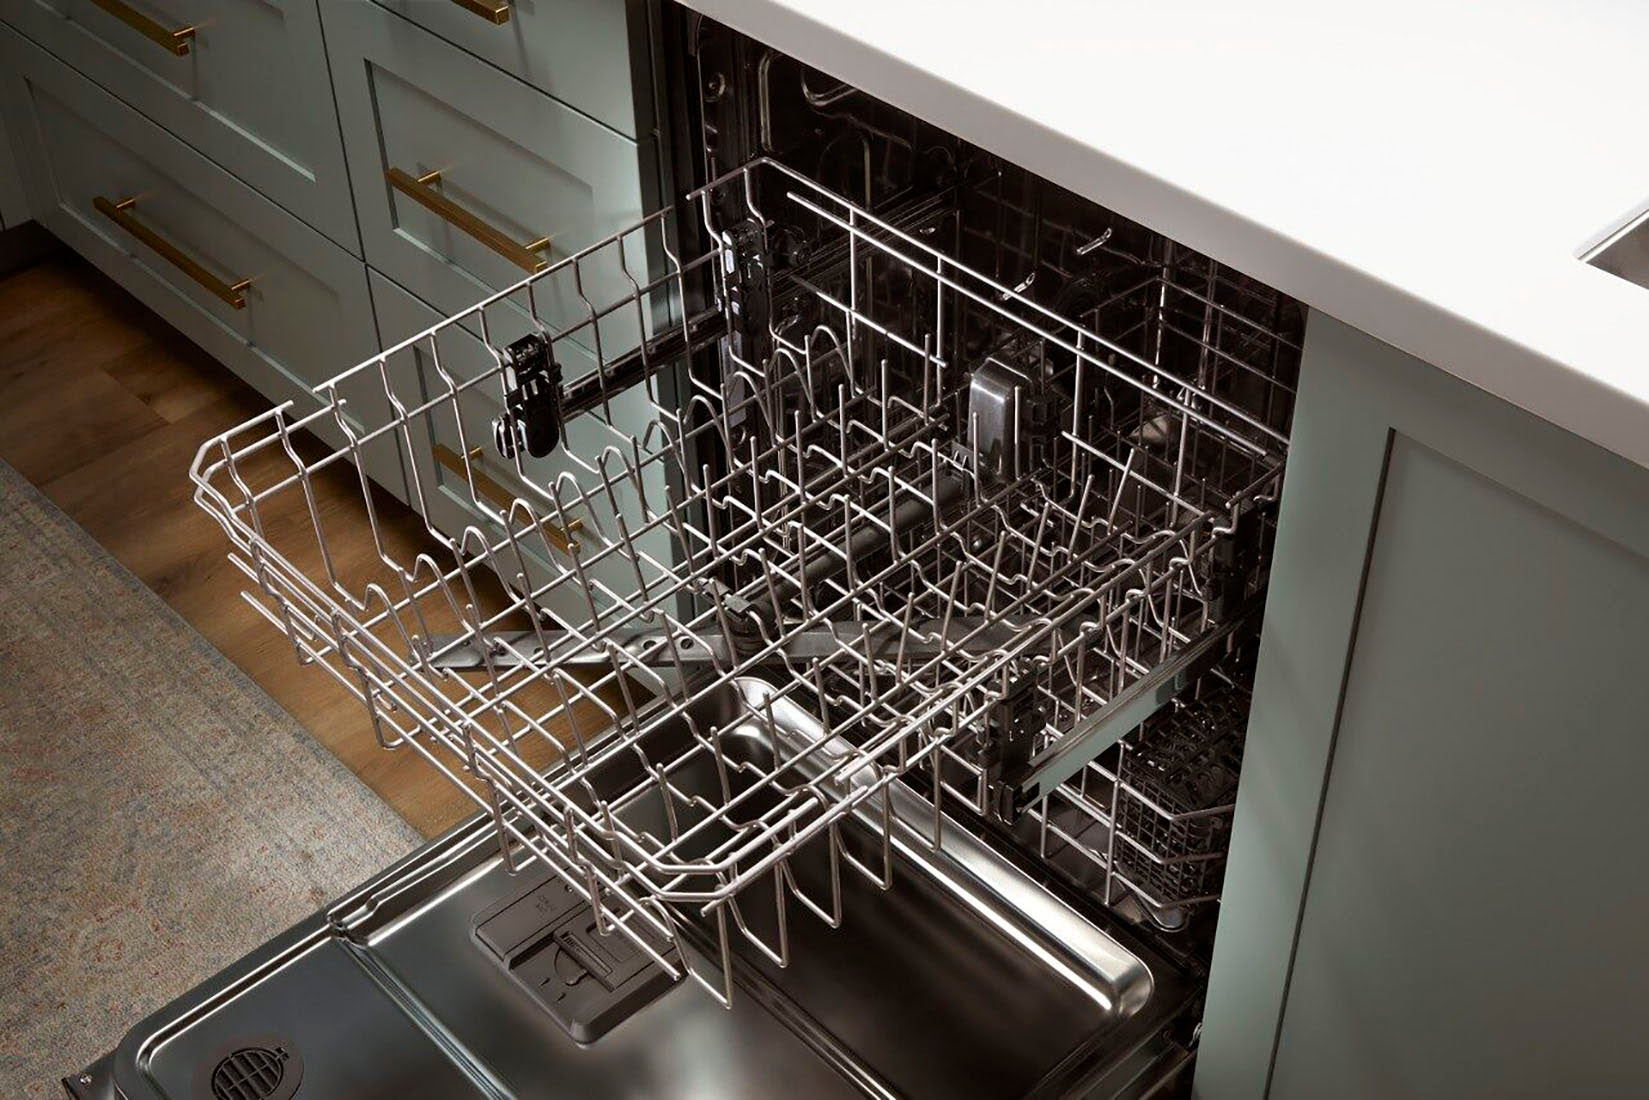 How To Fix The Error Code 45110 For Whirlpool Dishwasher